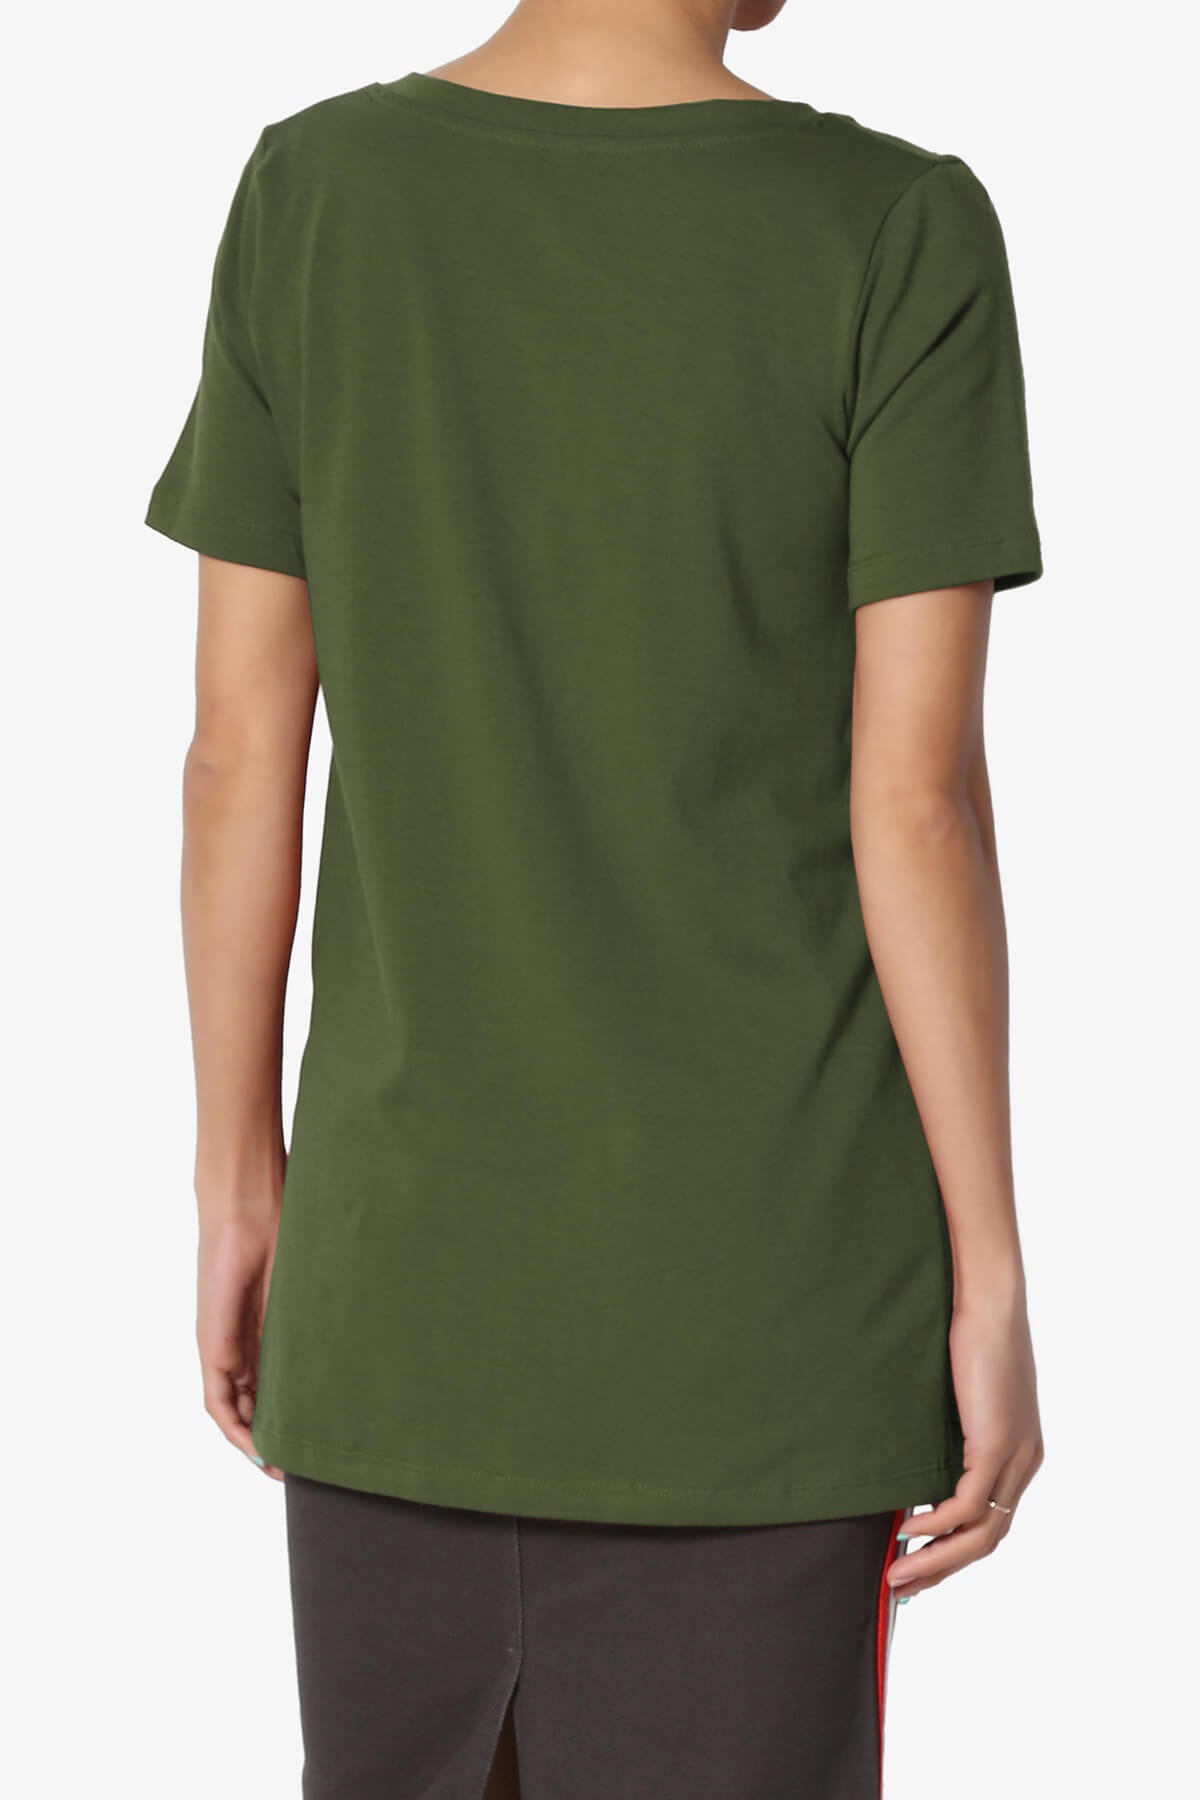 Load image into Gallery viewer, Elora V-Neck Short Sleeve T-Shirt ARMY GREEN_2
